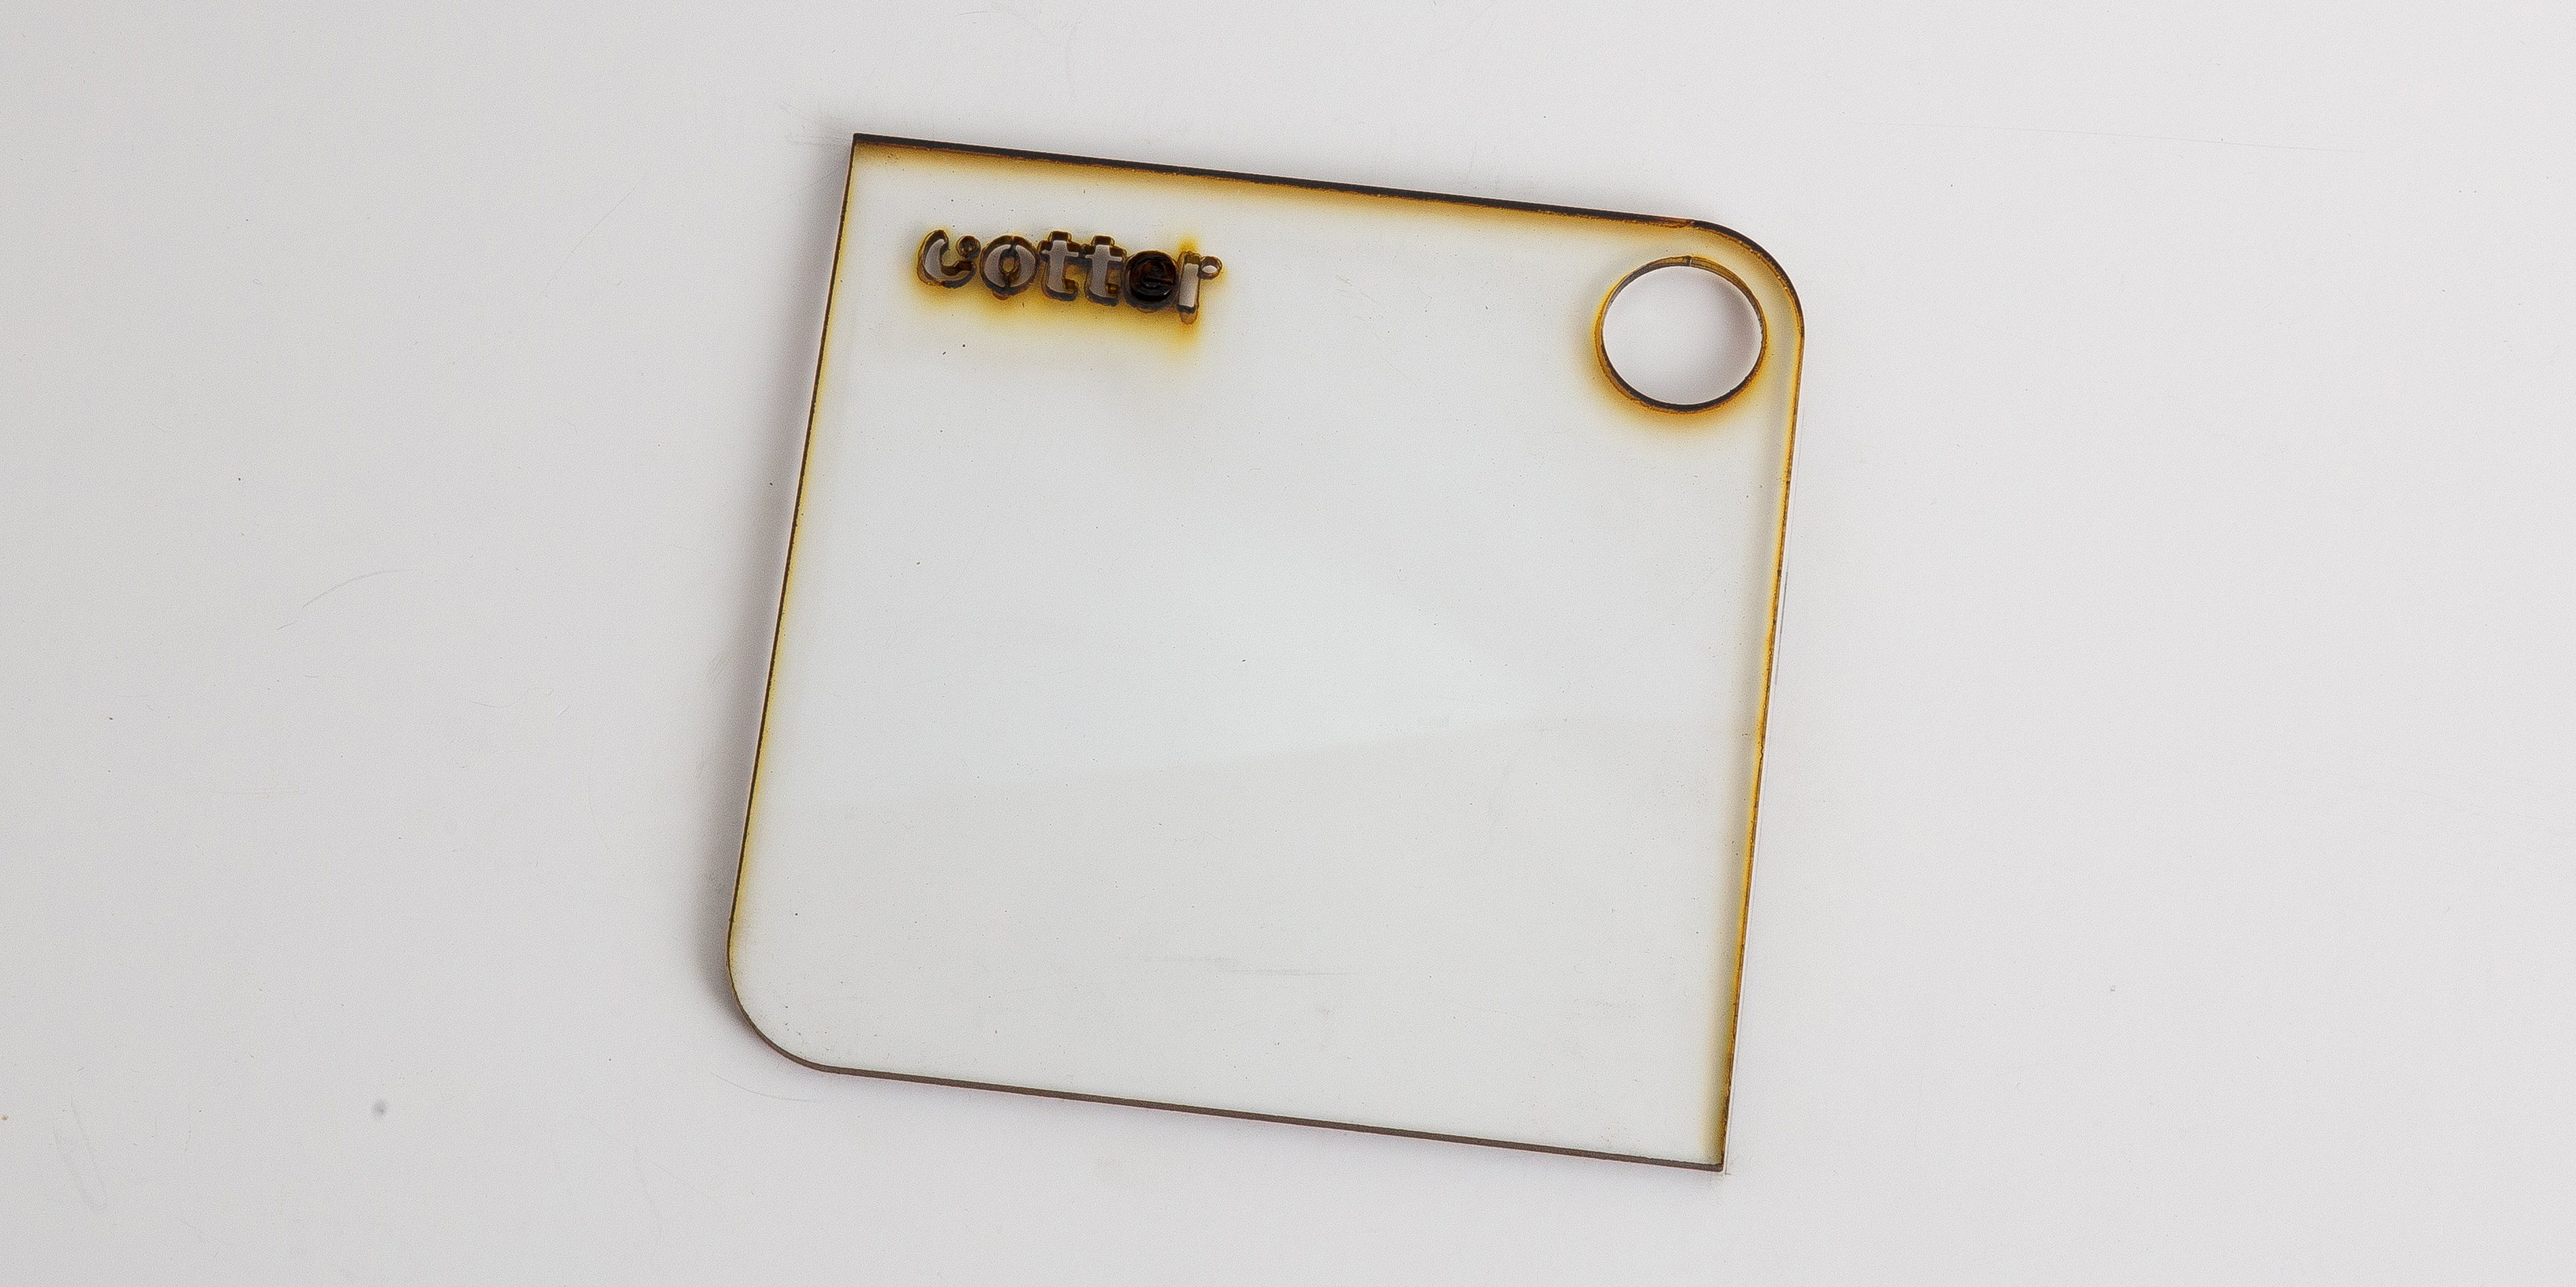 Polycarbonate Laser Engraving and Cutting